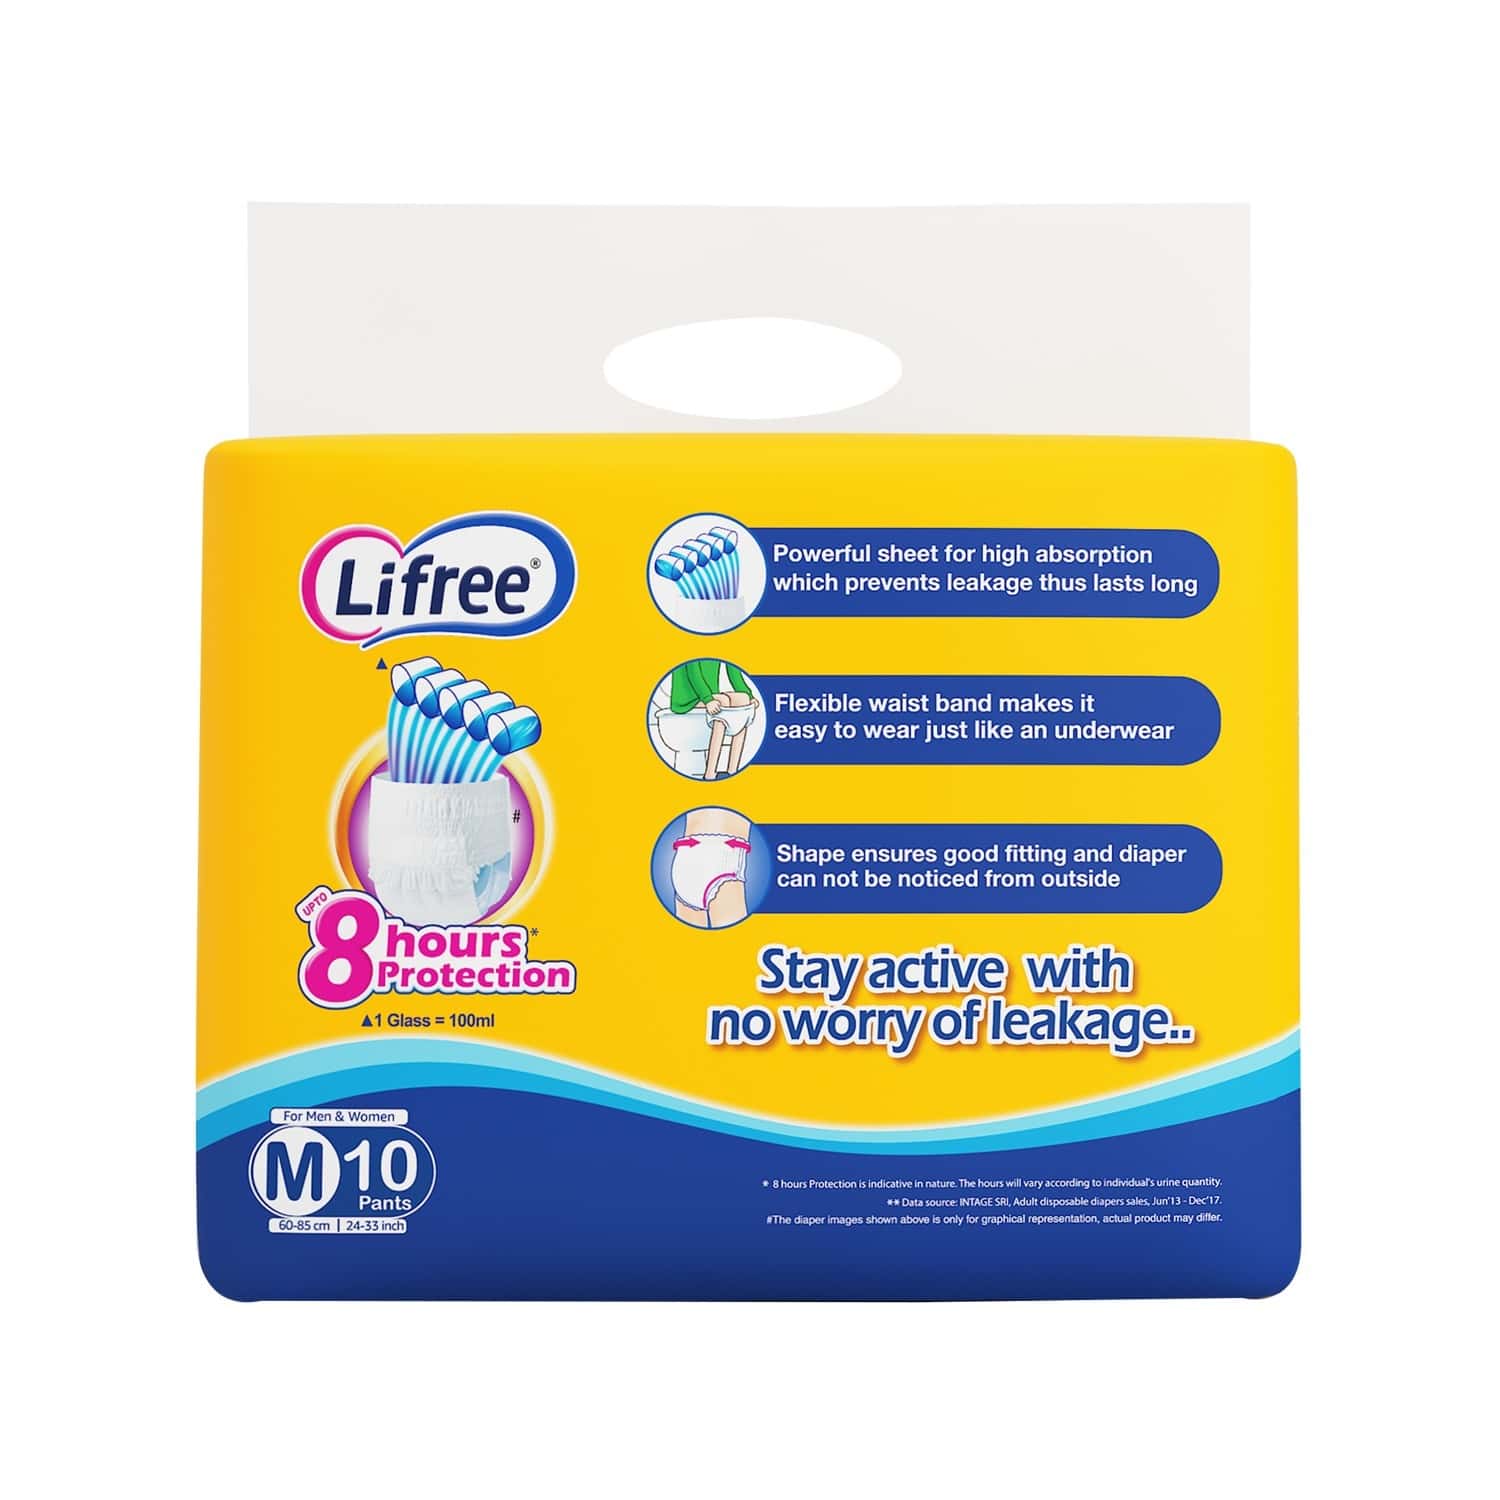 Lifree Absorbent Pants Adult Diaper Unisex Large Buy packet of 18 diapers  at best price in India  1mg